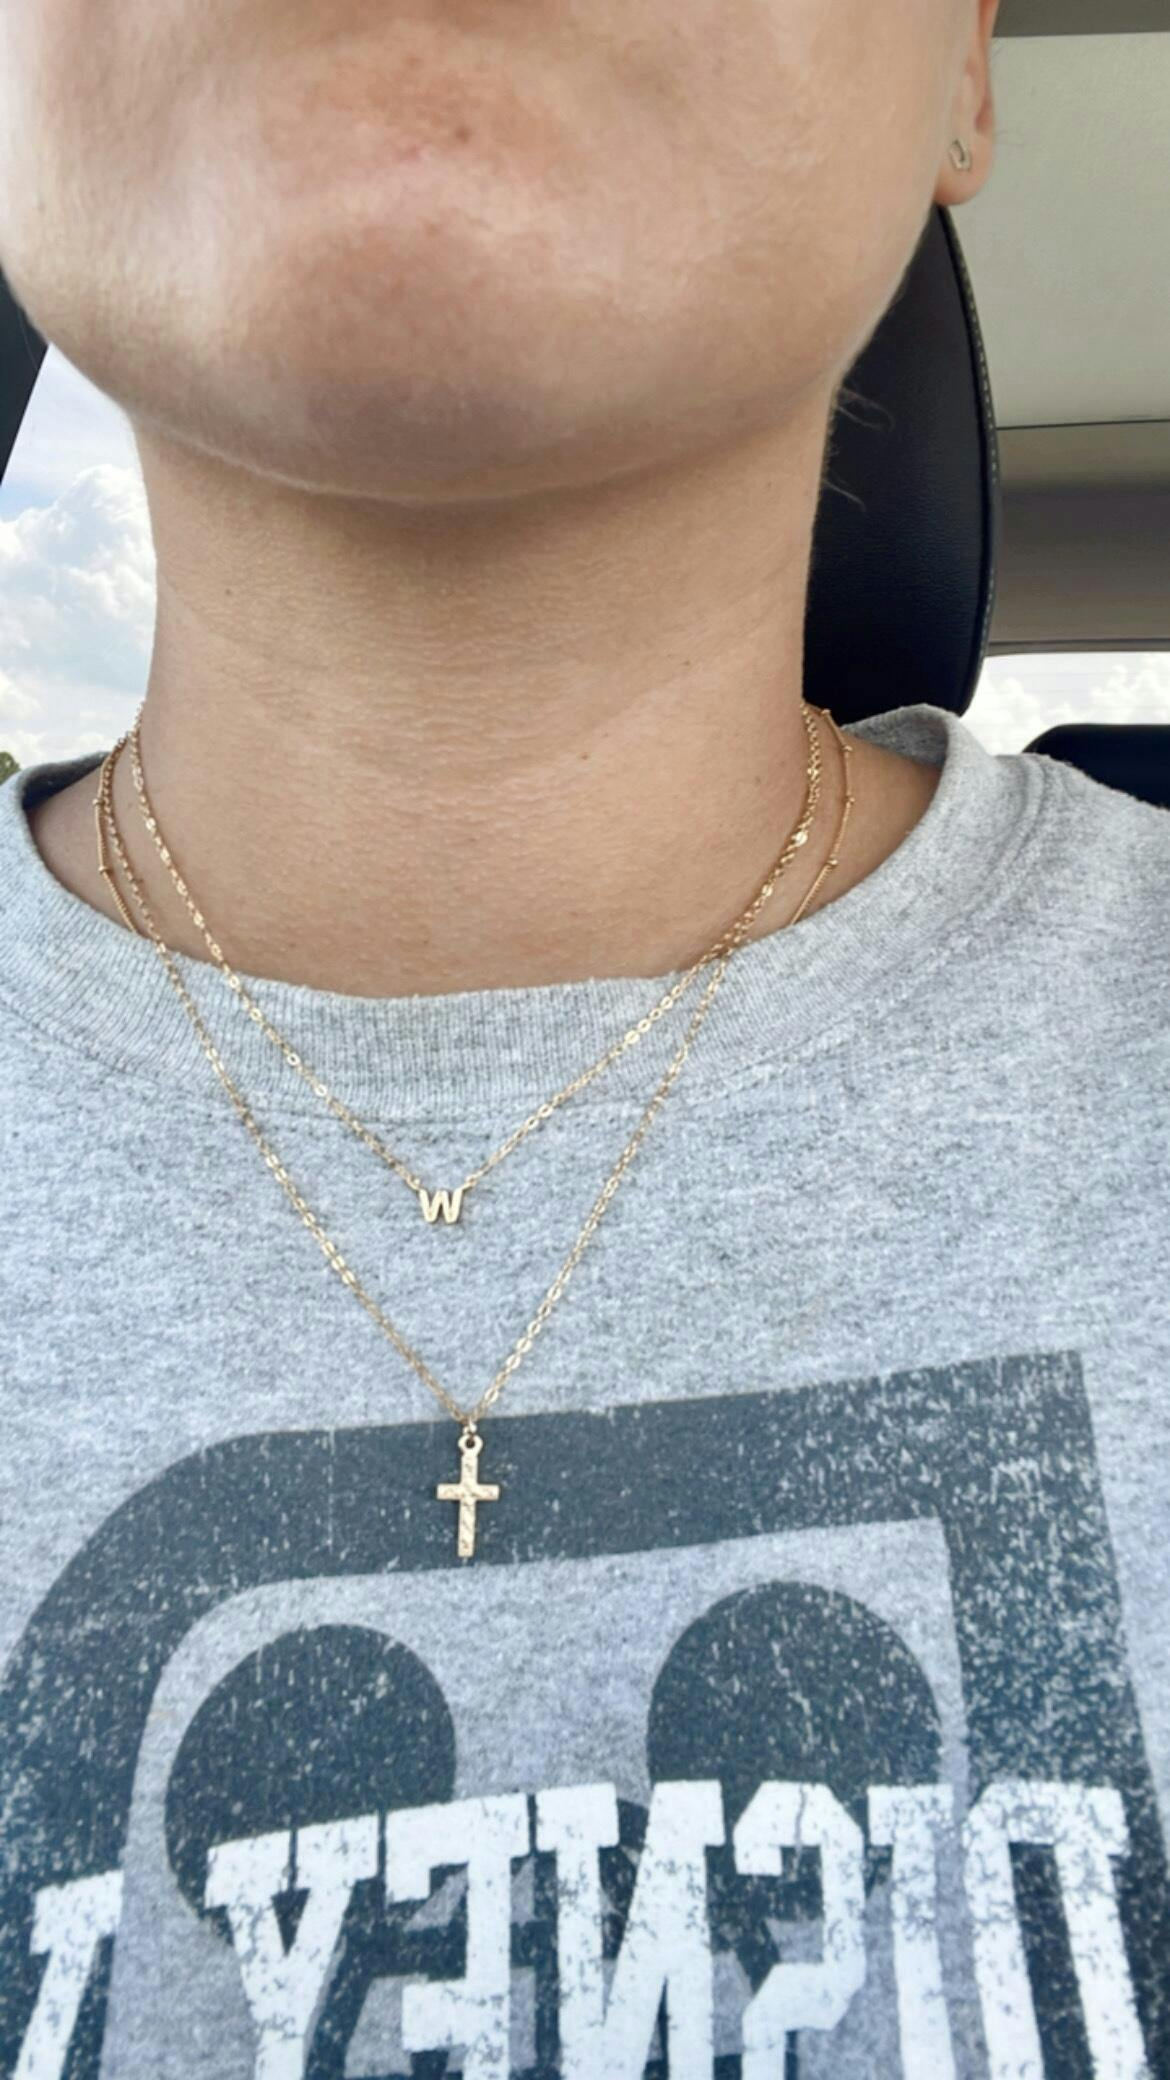 SALE • Cross Necklace • Tiny Cross Necklace • Christian Necklace • Simple • Dainty • Christmas Gift Baptism & for Everyday Wear Birthday Sieraden Kettingen Bedelkettingen 